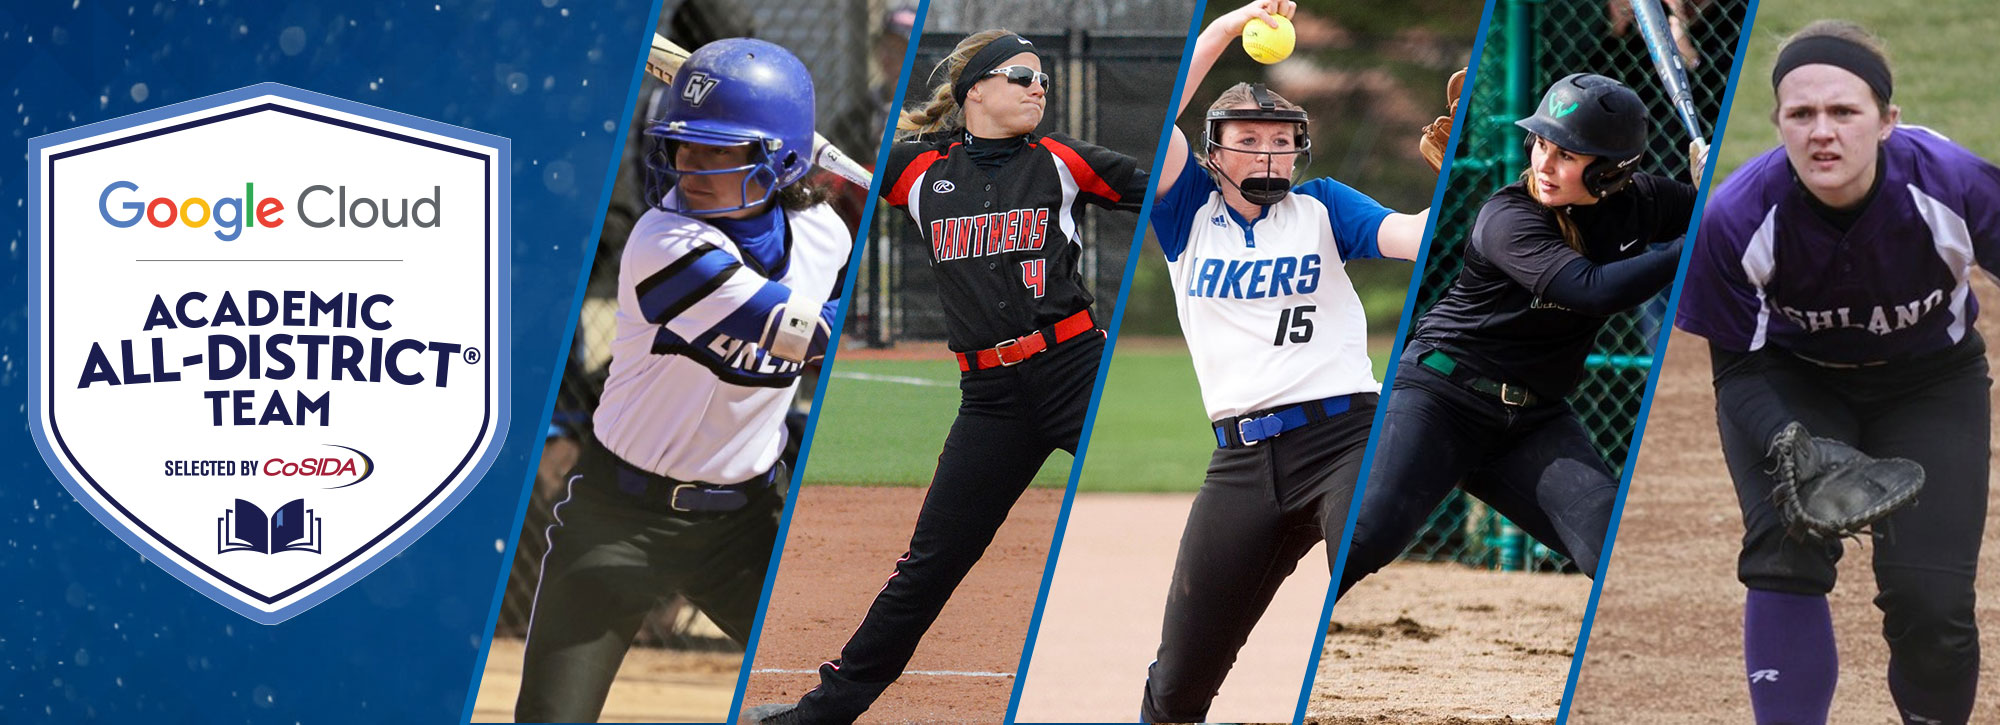 Five Earn Google Cloud Academic All-District Softball Recognition